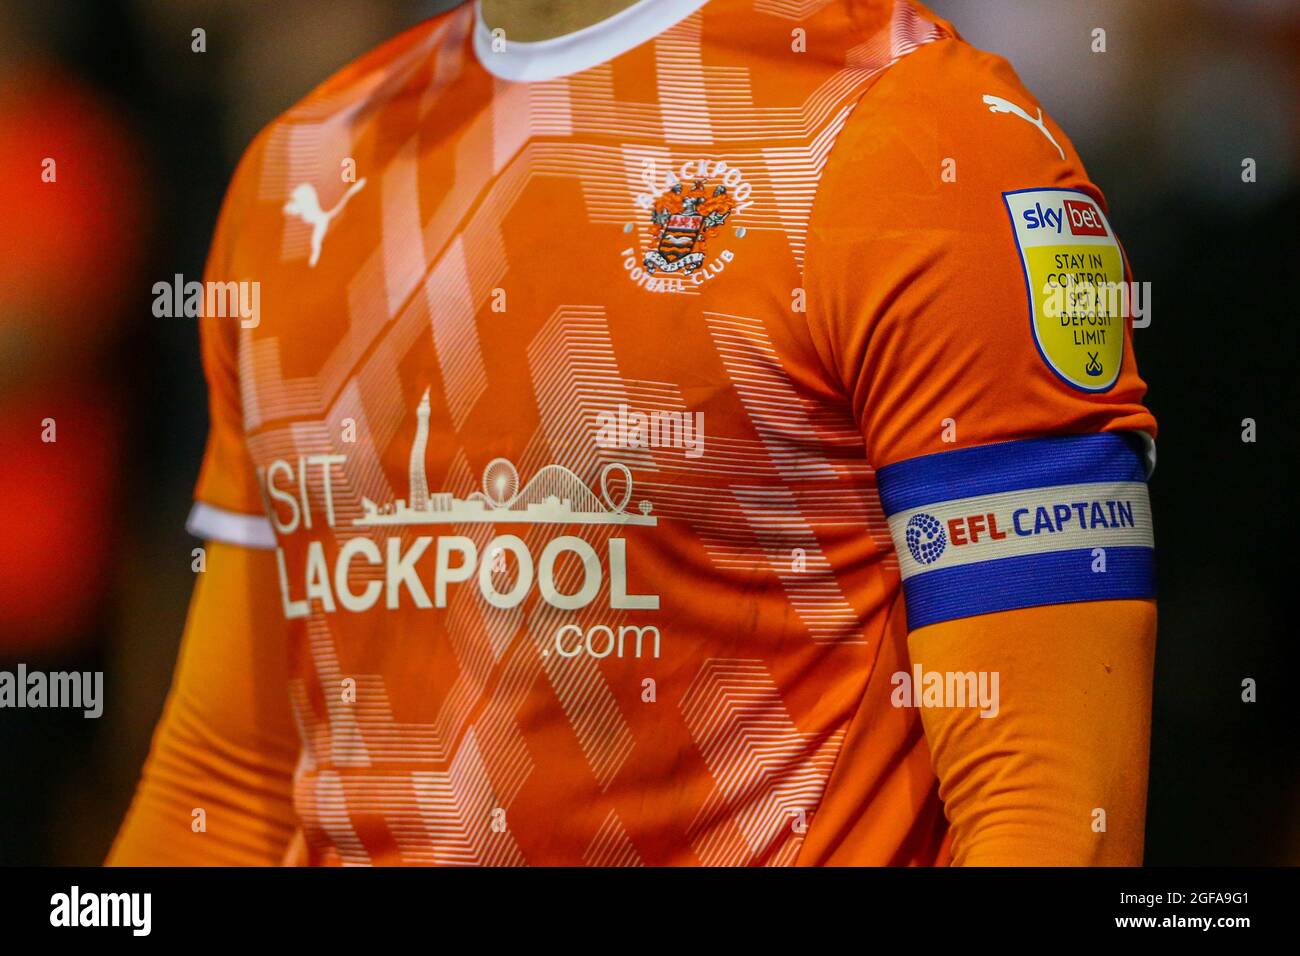 Blackpool, UK. 24th Aug, 2021. Close up of the Blackpool Football Club home shirt during the Carabao Cup match between Blackpool and Sunderland at Bloomfield Road, Blackpool, England on 24 August 2021. Photo by Sam Fielding/PRiME Media Images. Credit: PRiME Media Images/Alamy Live News Stock Photo